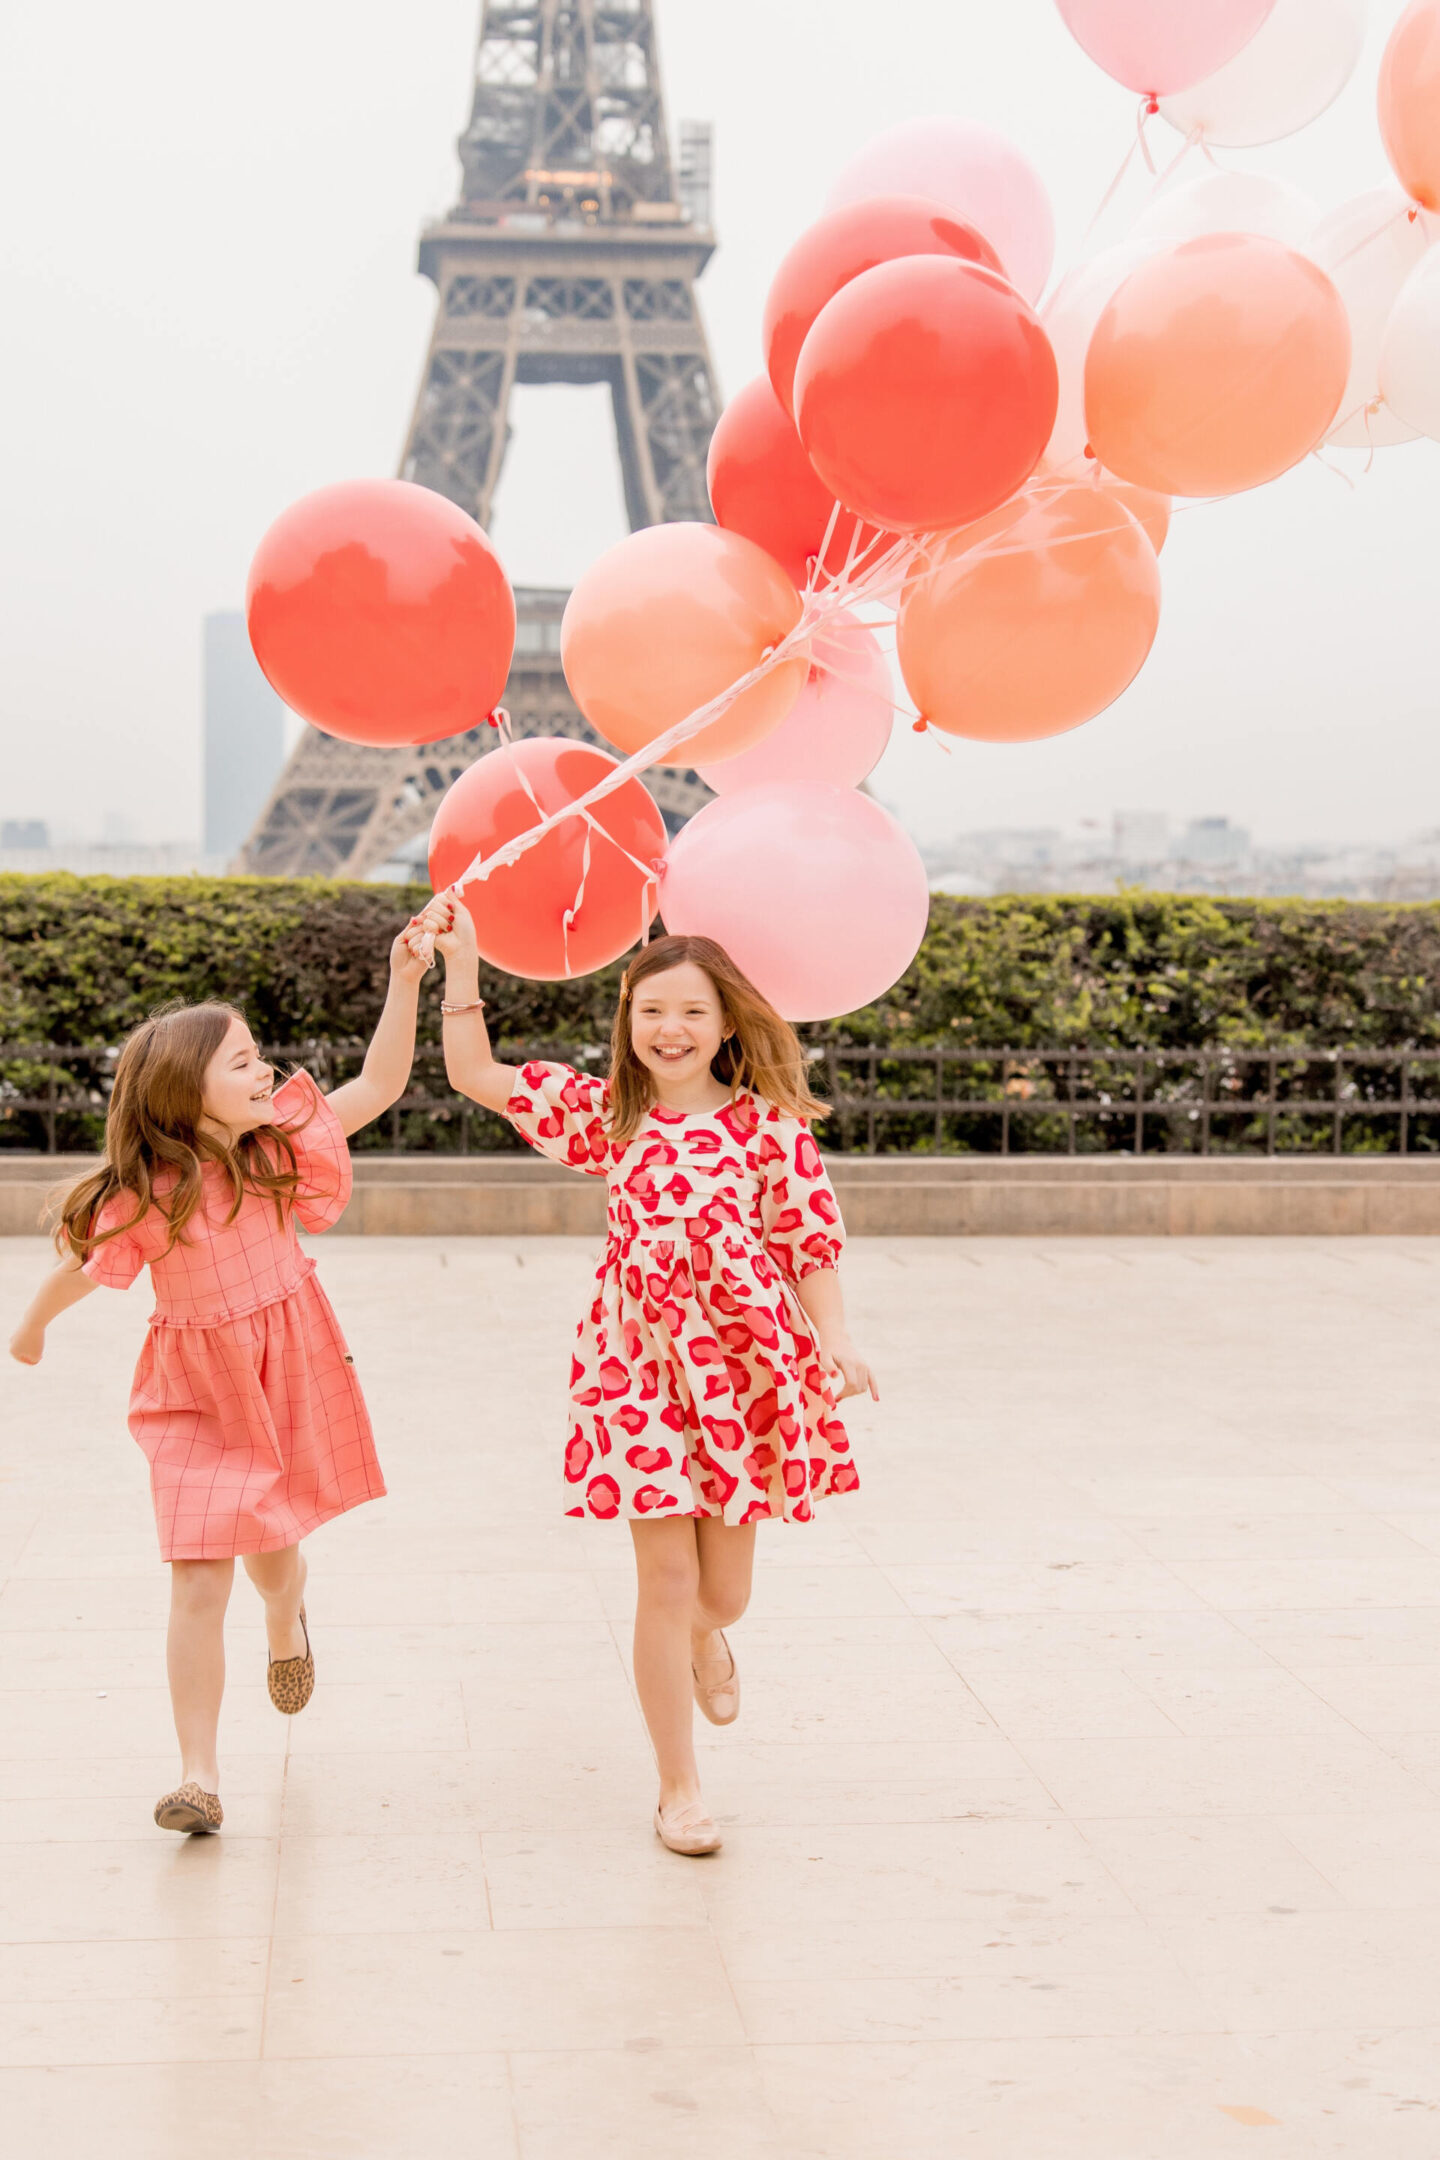 6 day Paris itinerary featured by Hello Happiness.